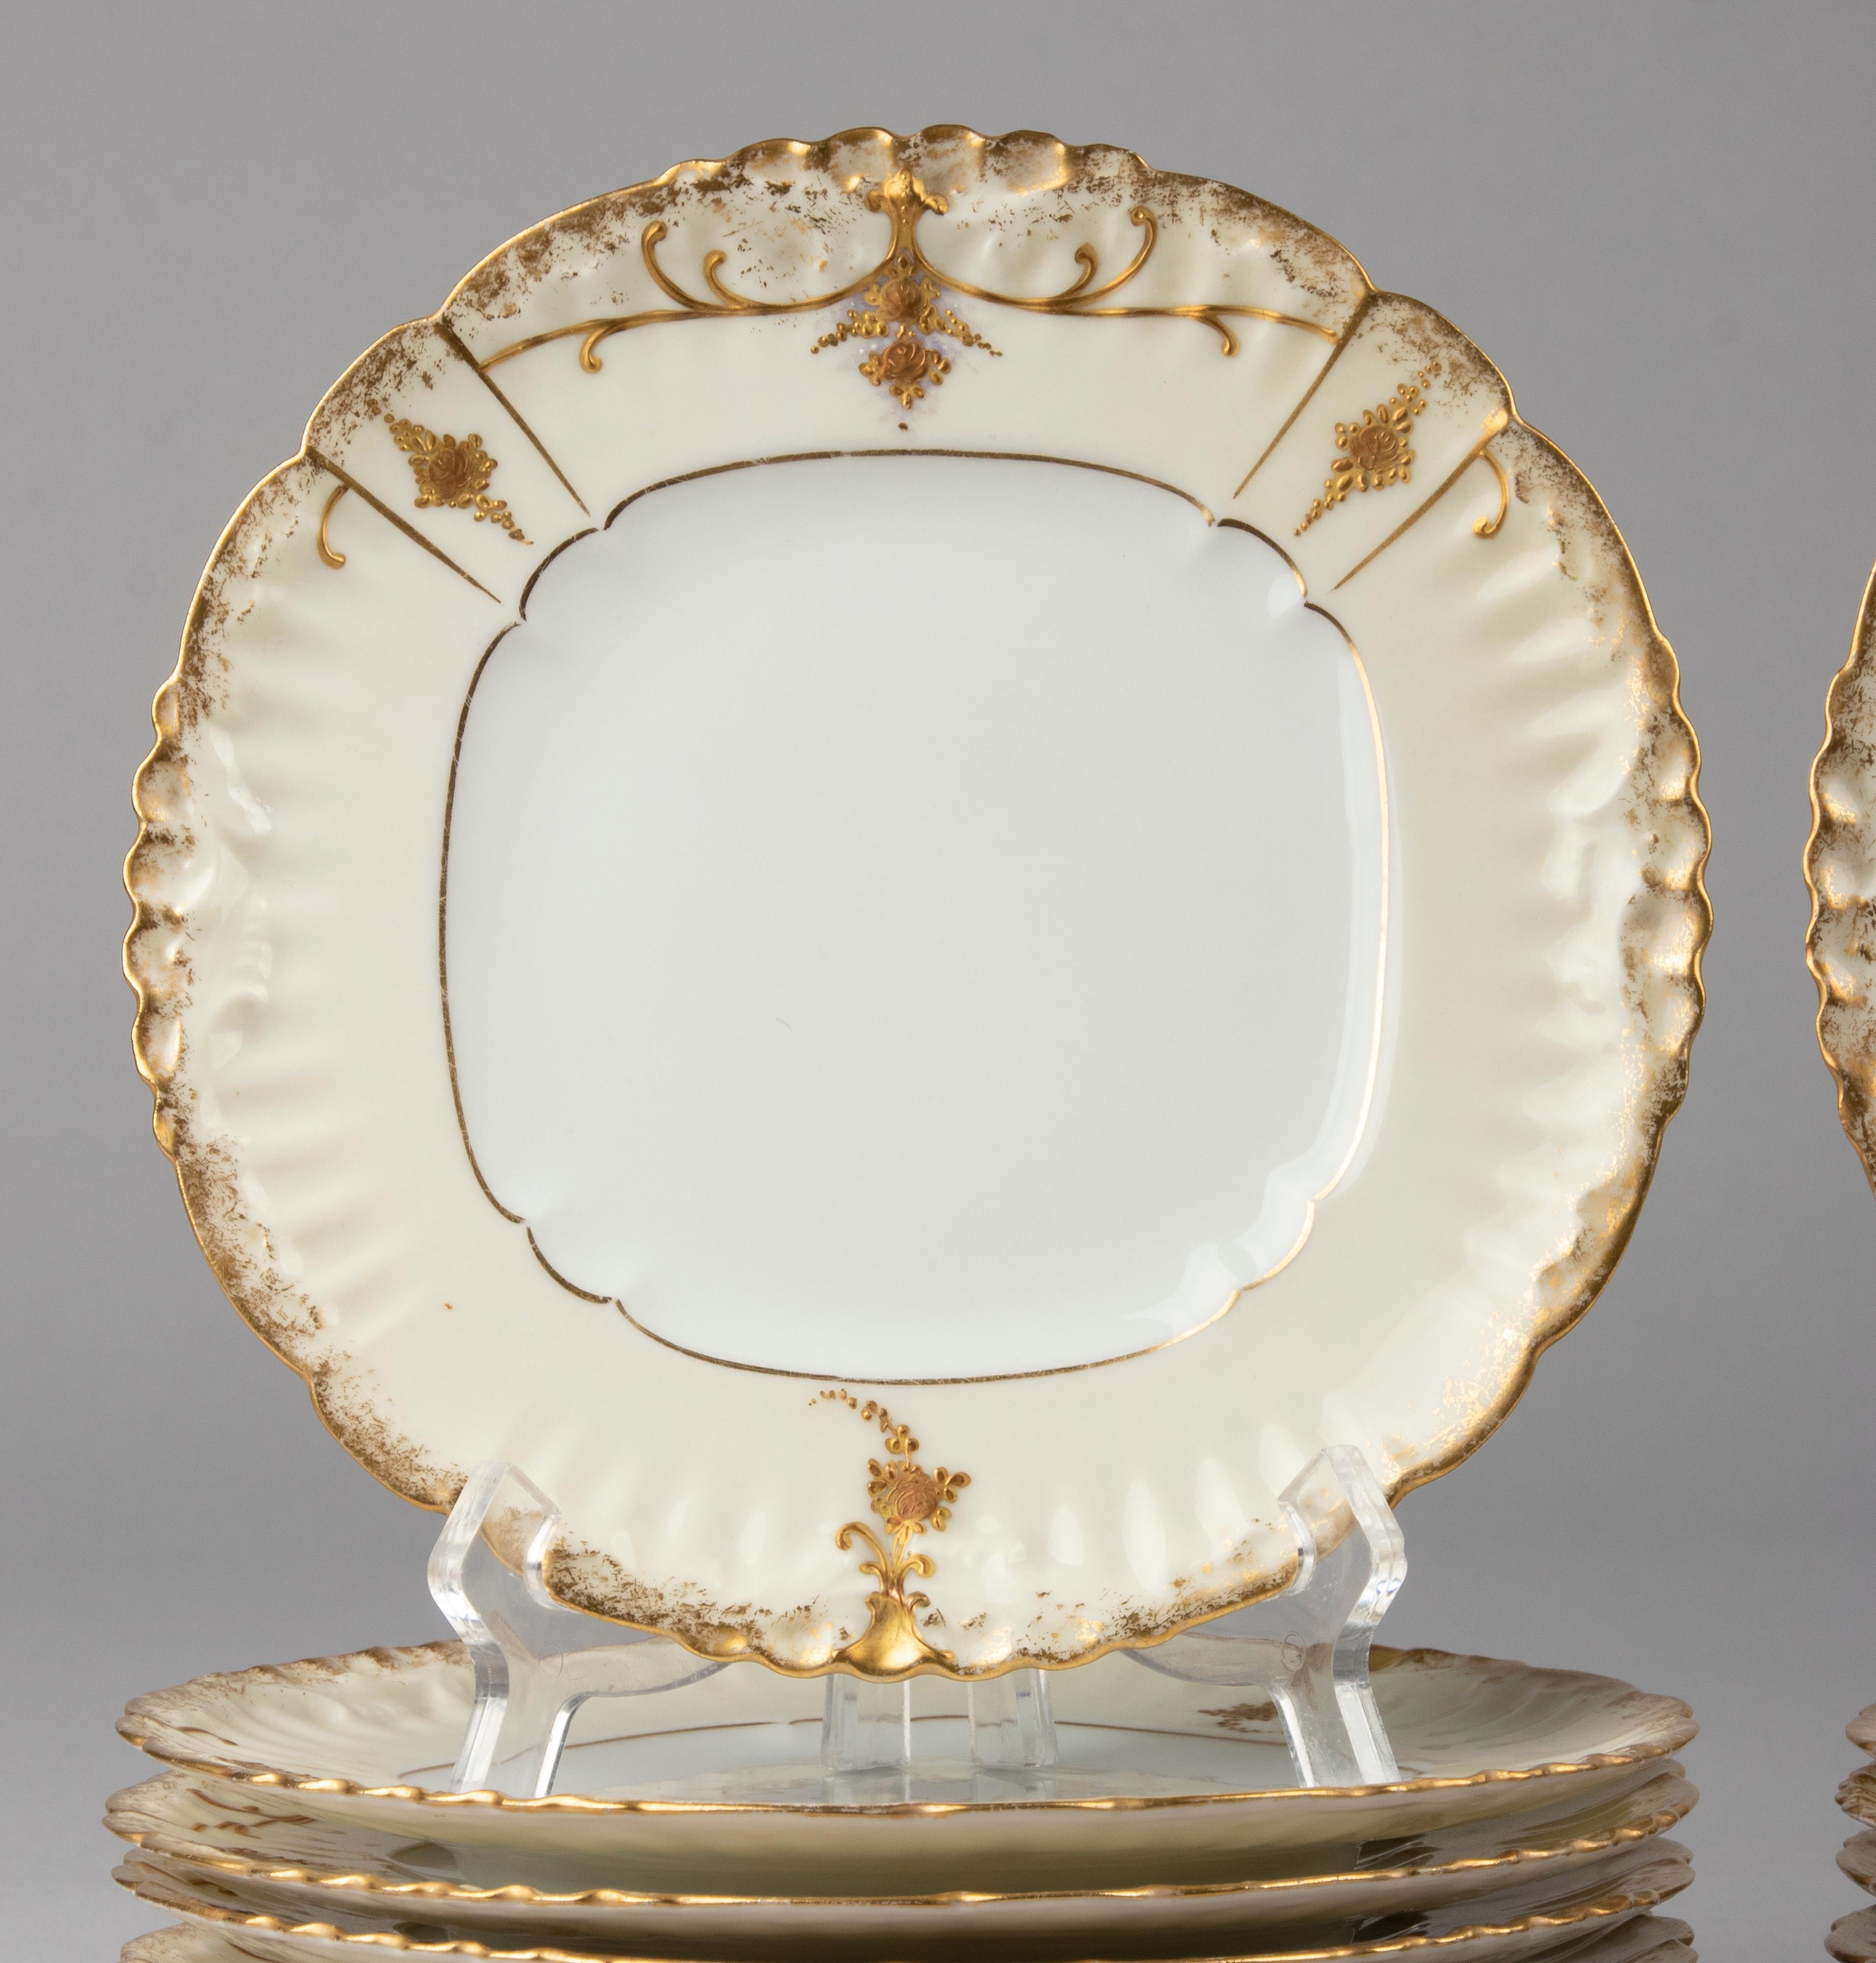 Gilt Set of 11 Early 20th Century Porcelain Dessert Plates Gilded by Limoges